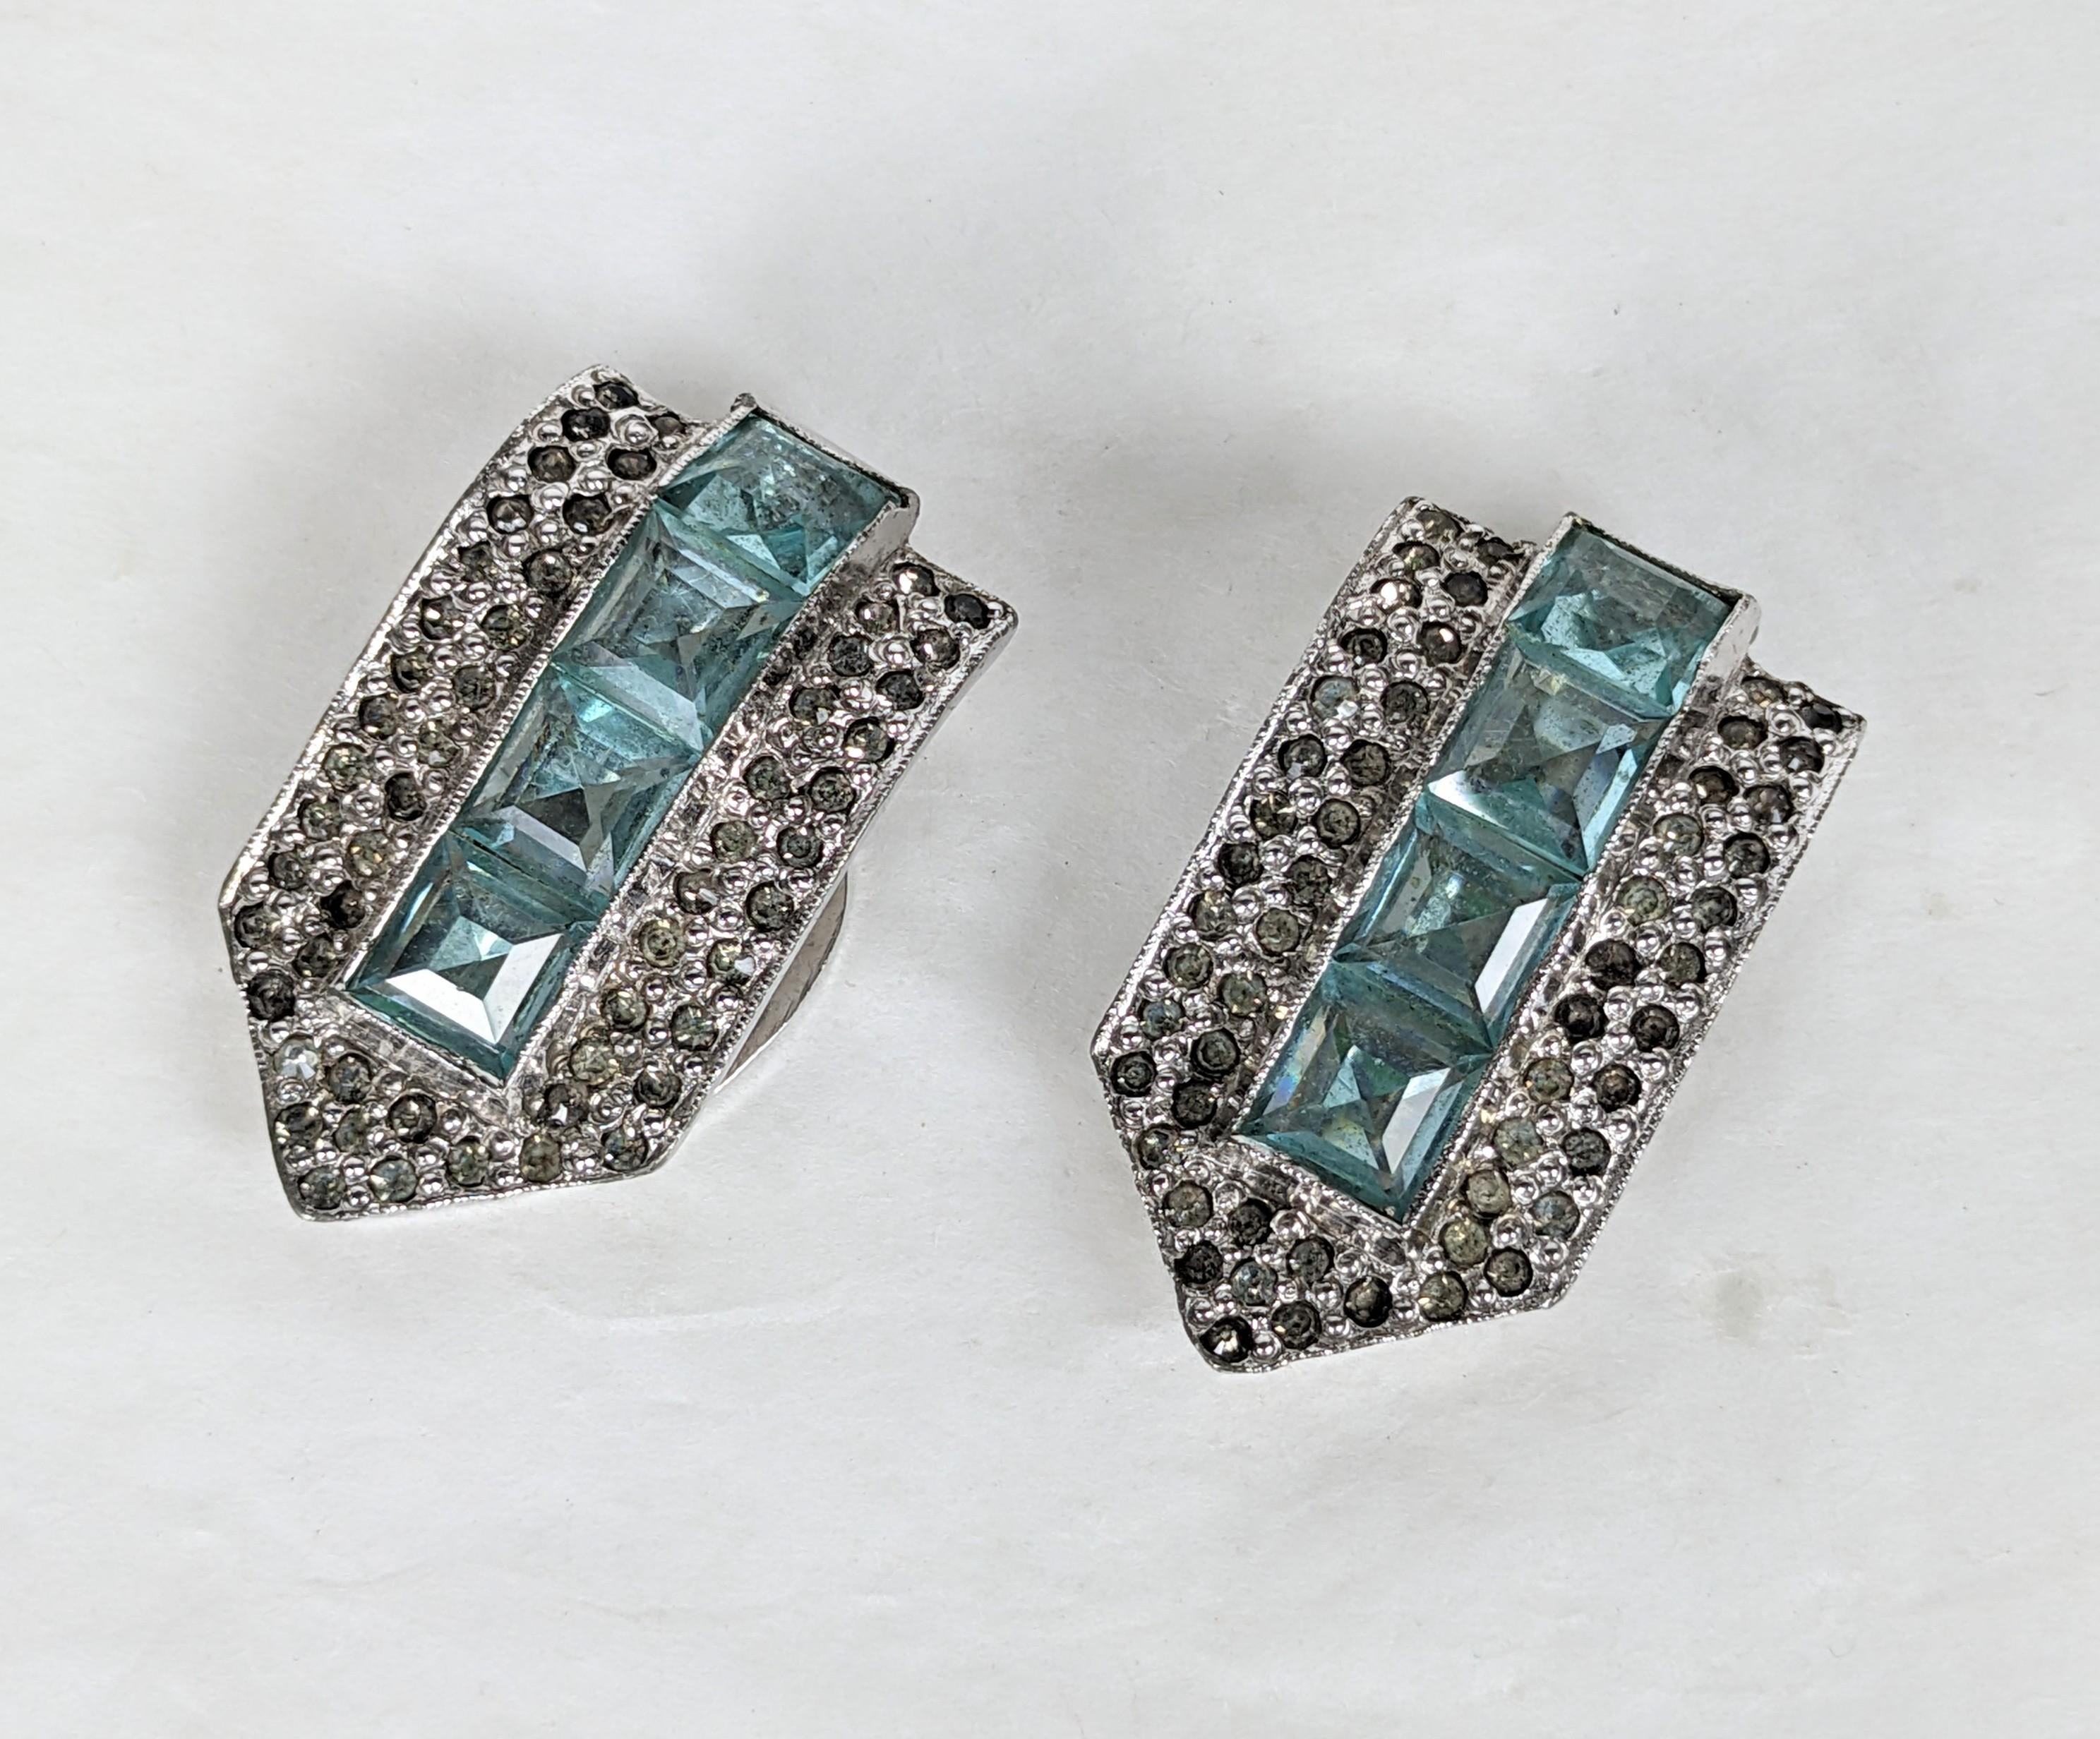 Art Deco Faux Aquamarine Dress Clips from the 1930's.  High quality faux in rhodium finish with channel set aqua pastes and pave surround. 1930's USA. Each 1.25